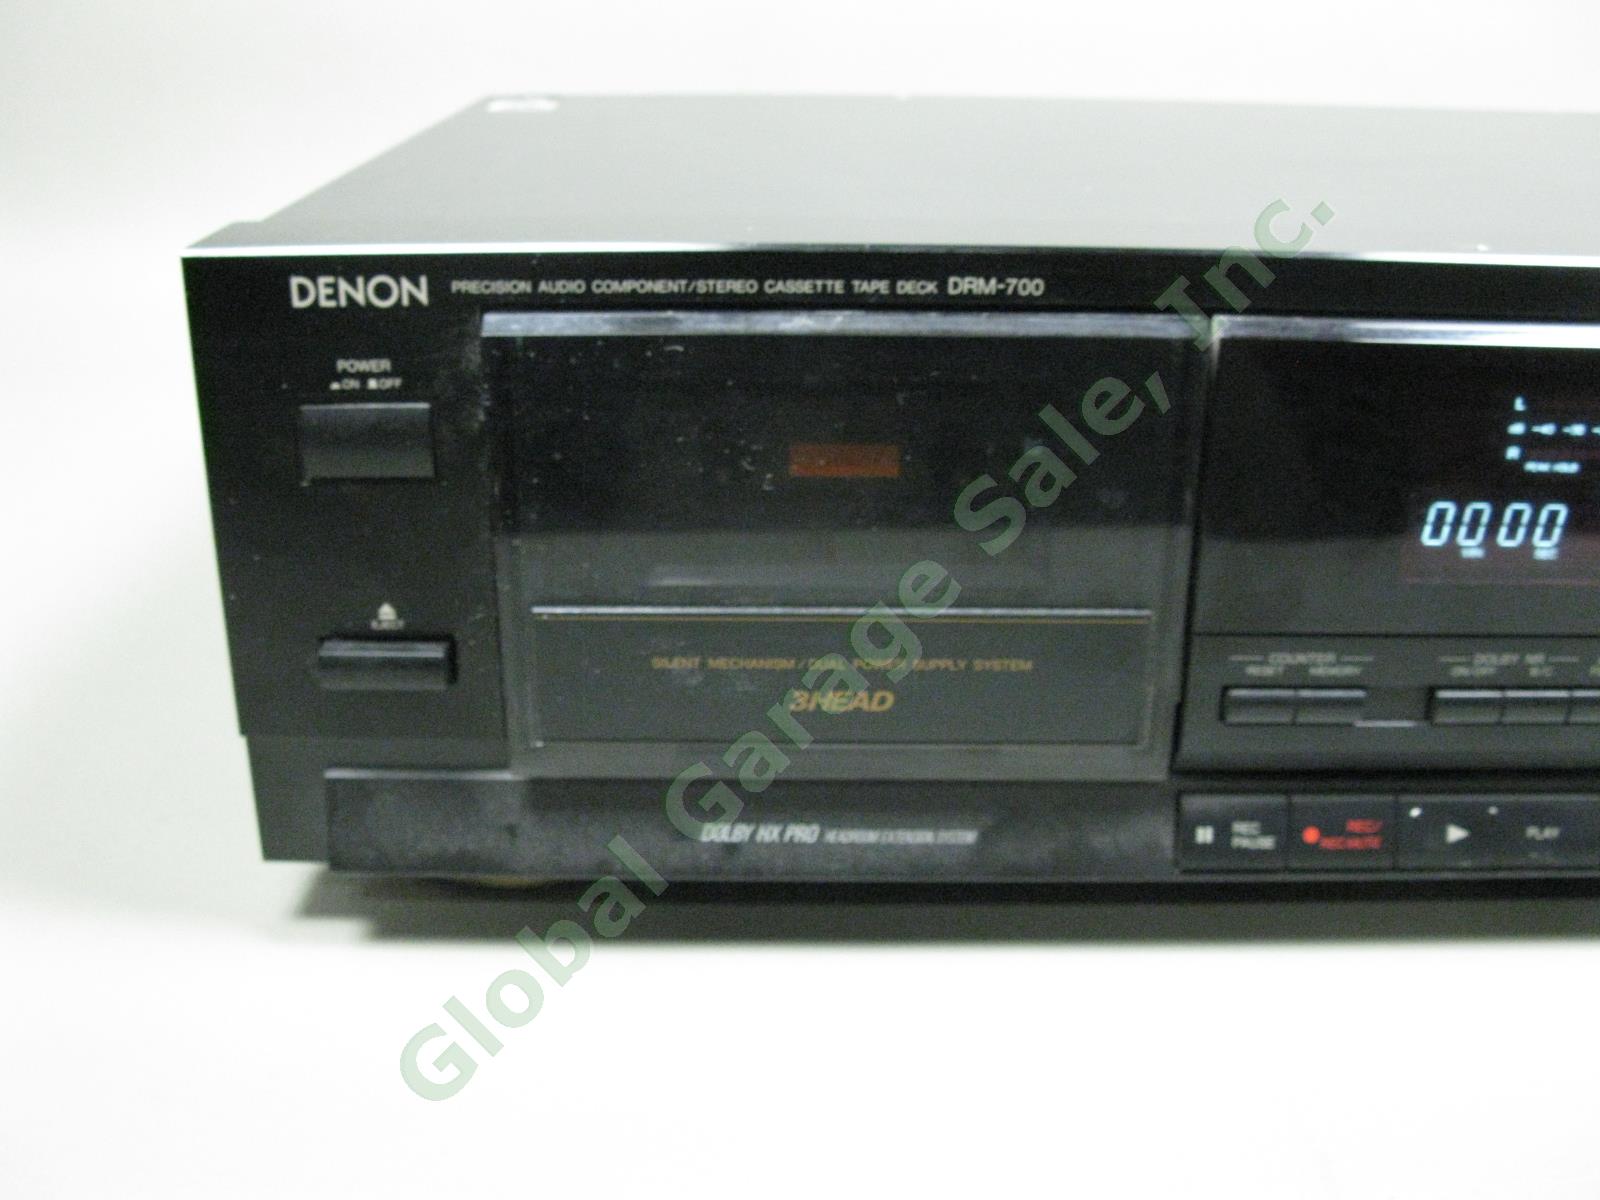 Vintage Denon DRM-700 Stereo Cassette Tape Deck 3-Head Tested Working Condition 1